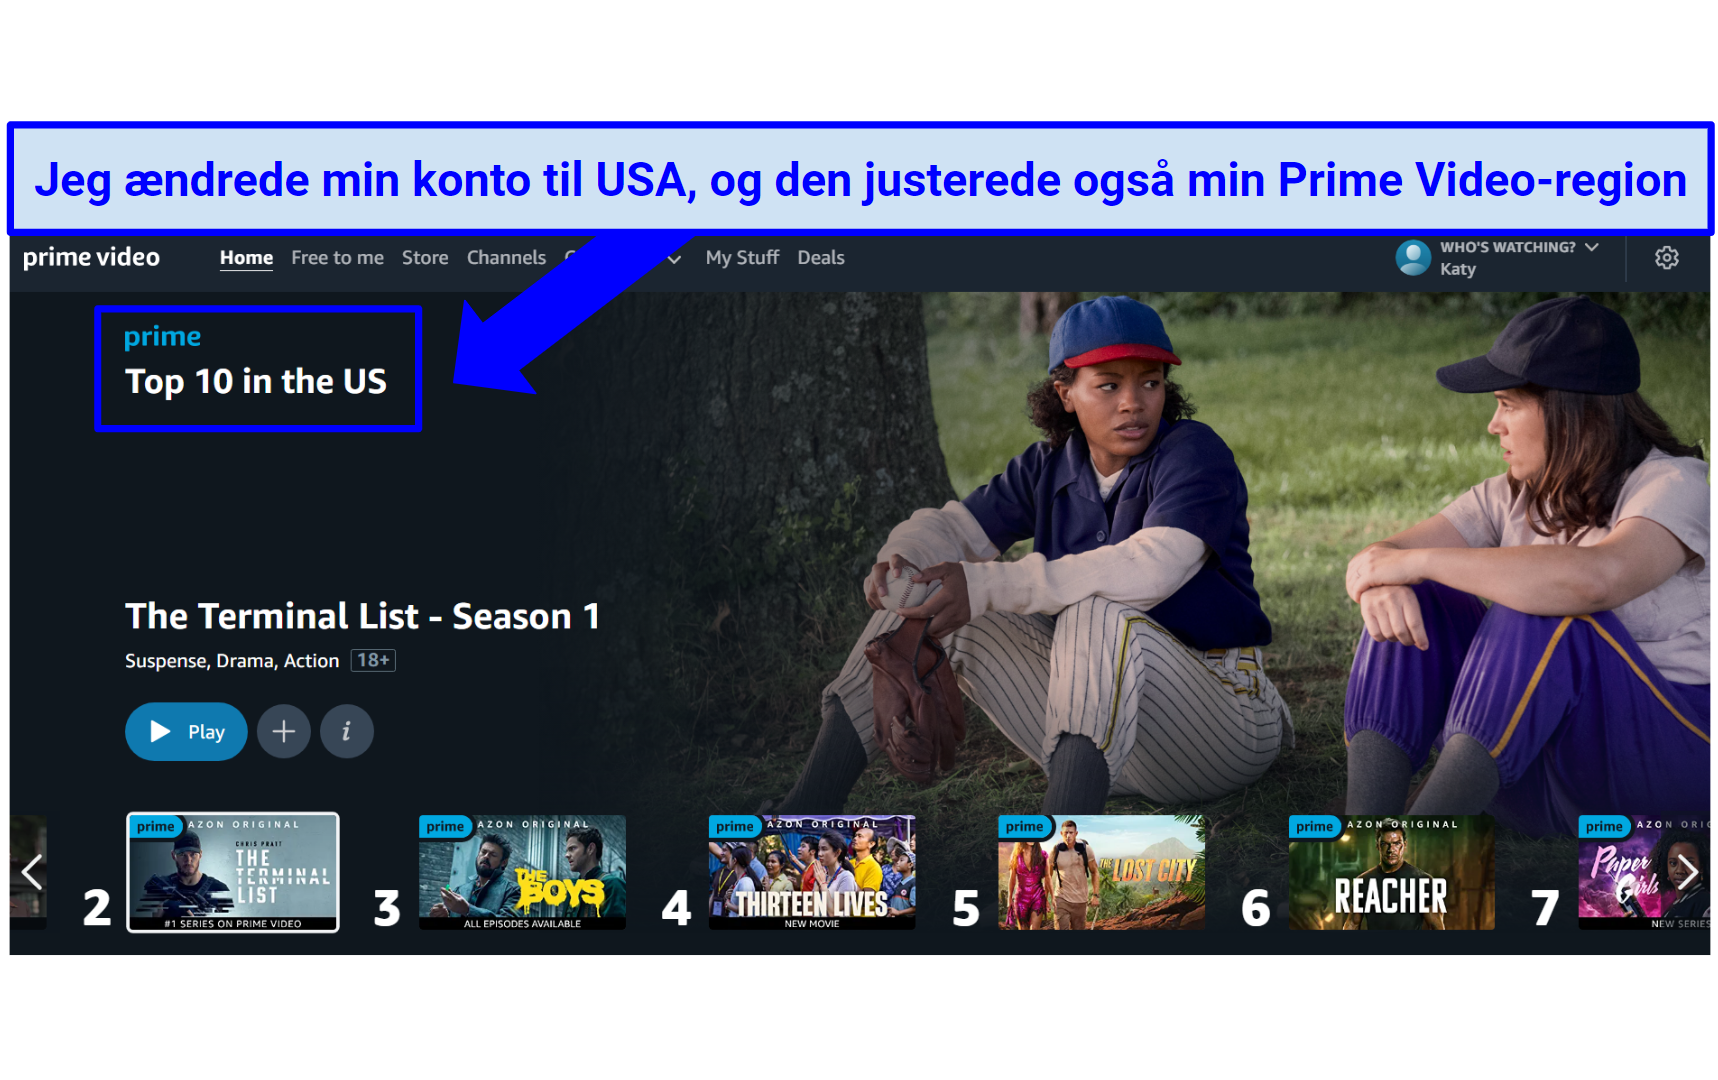 The US Prime Video library, displaying Top 10 titles in the US